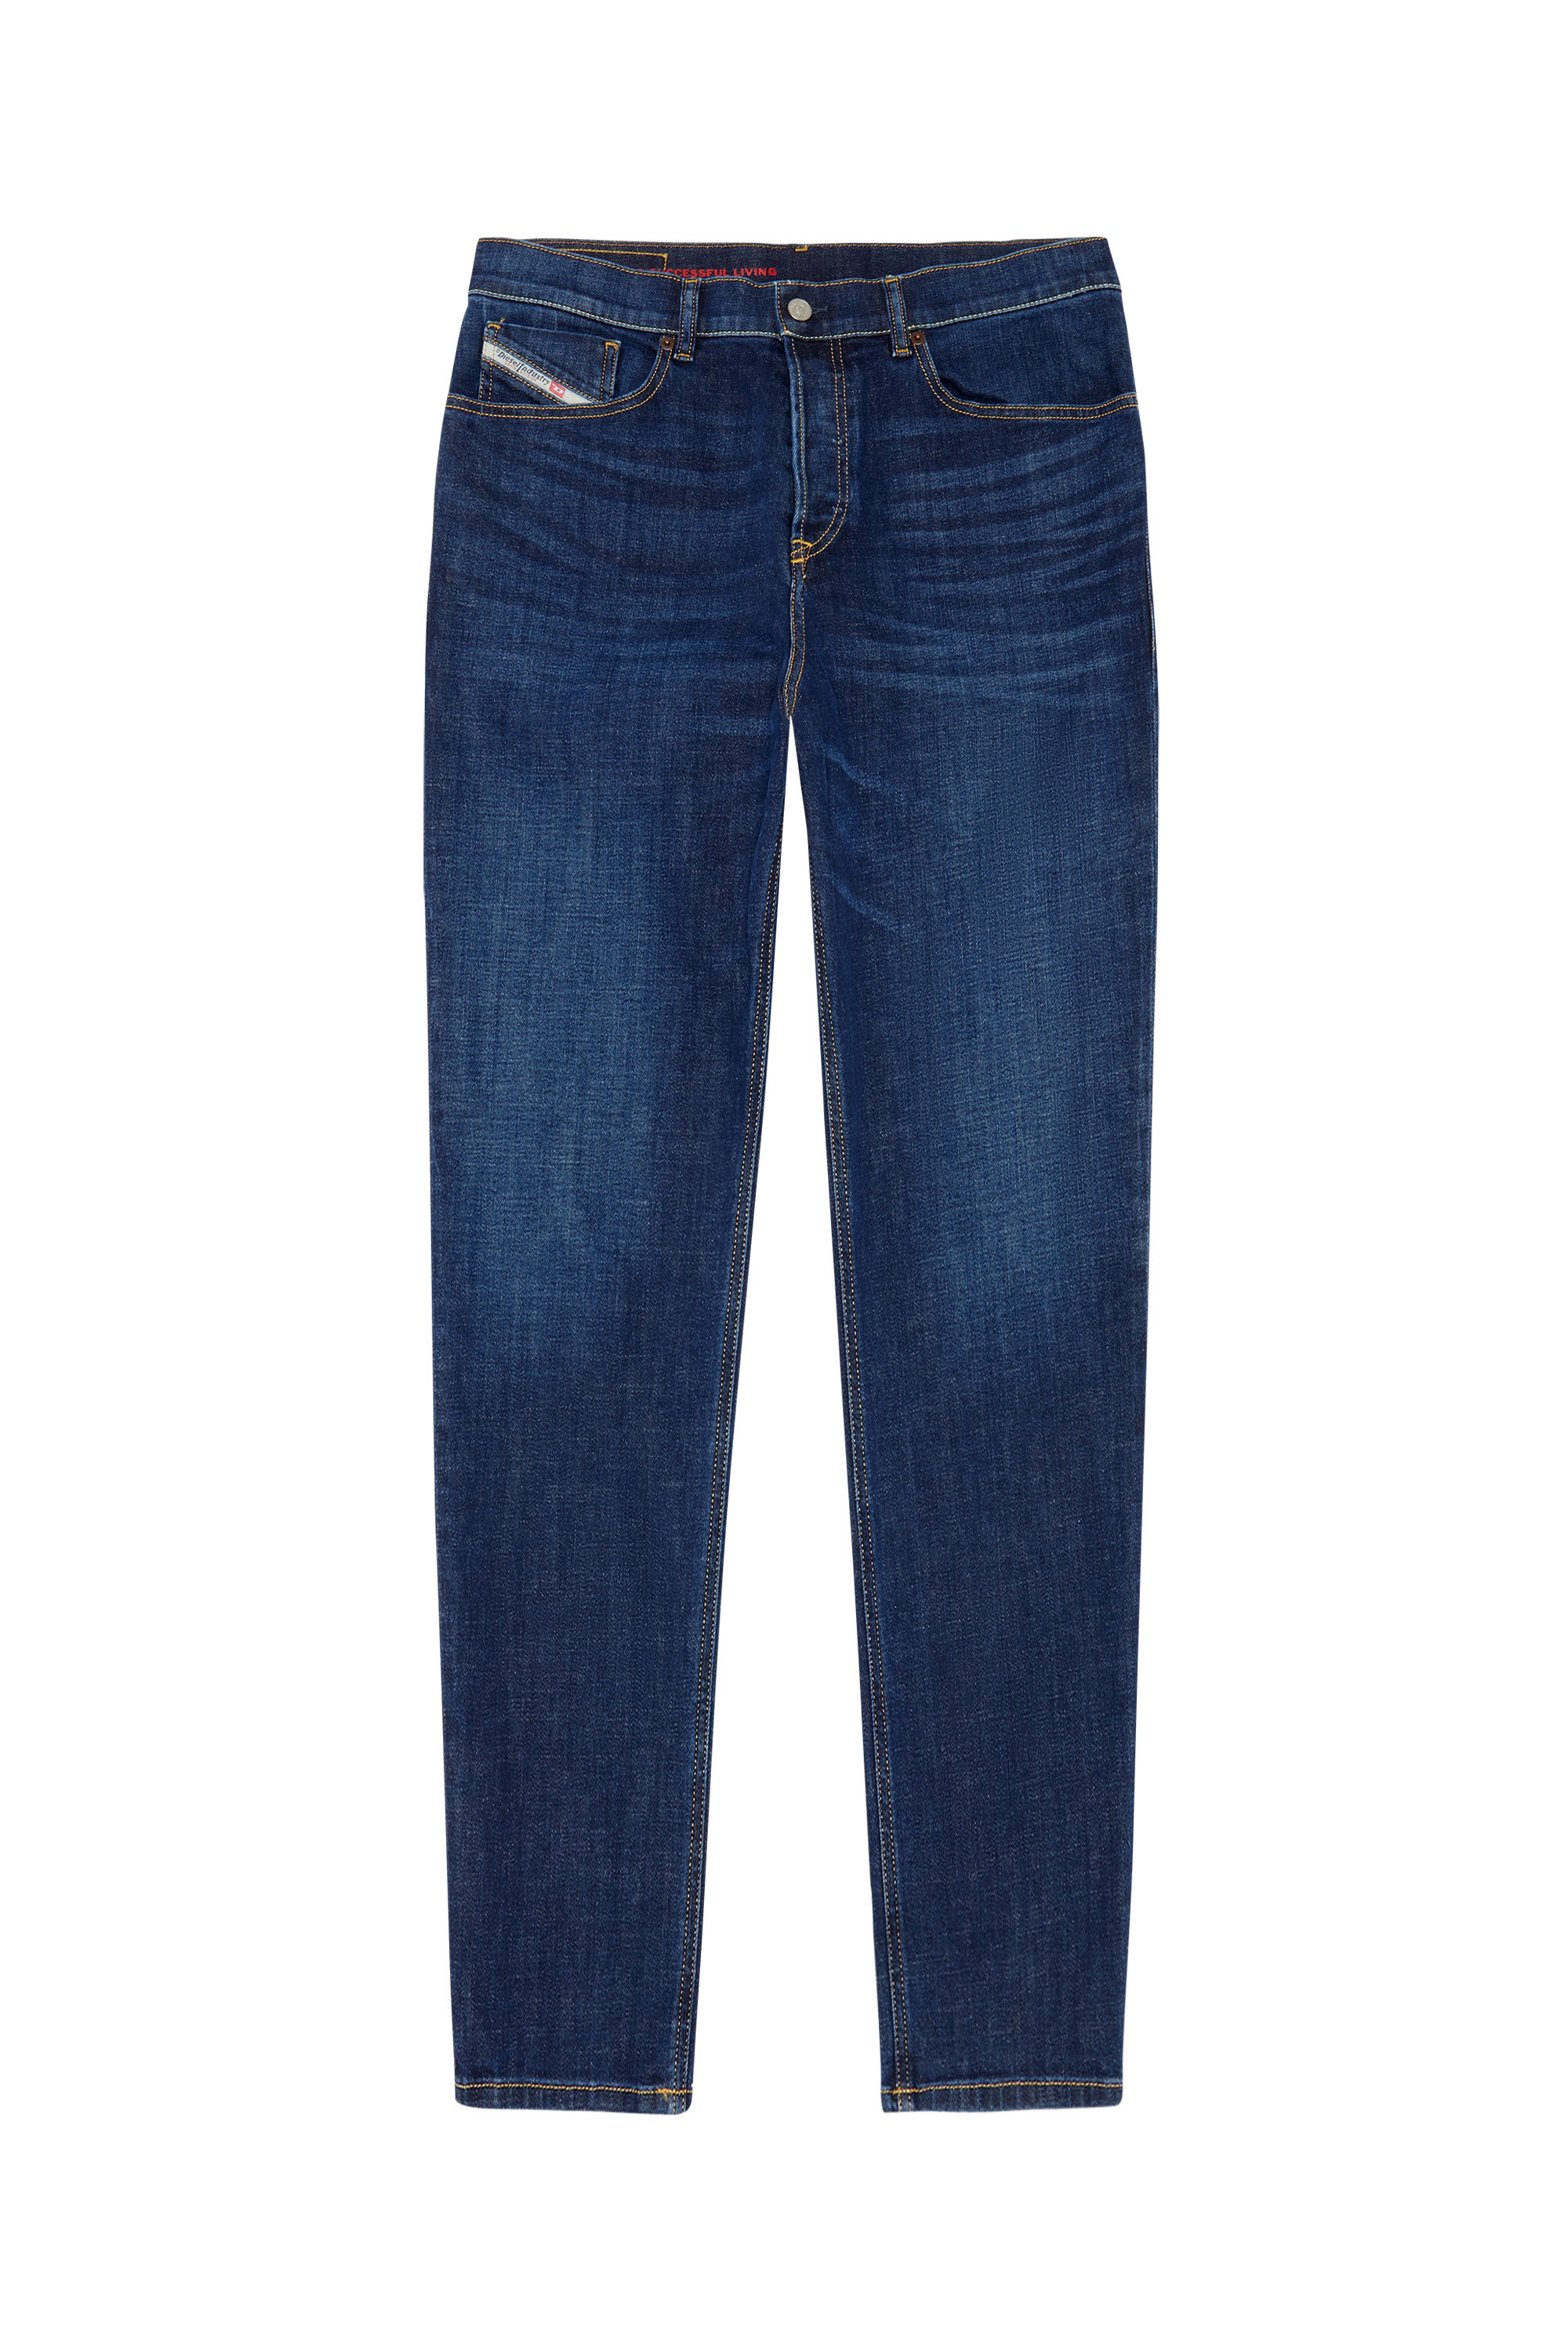 Tapered Jeans 2005 D-Fining 09B90, Dark Blue - Jeans